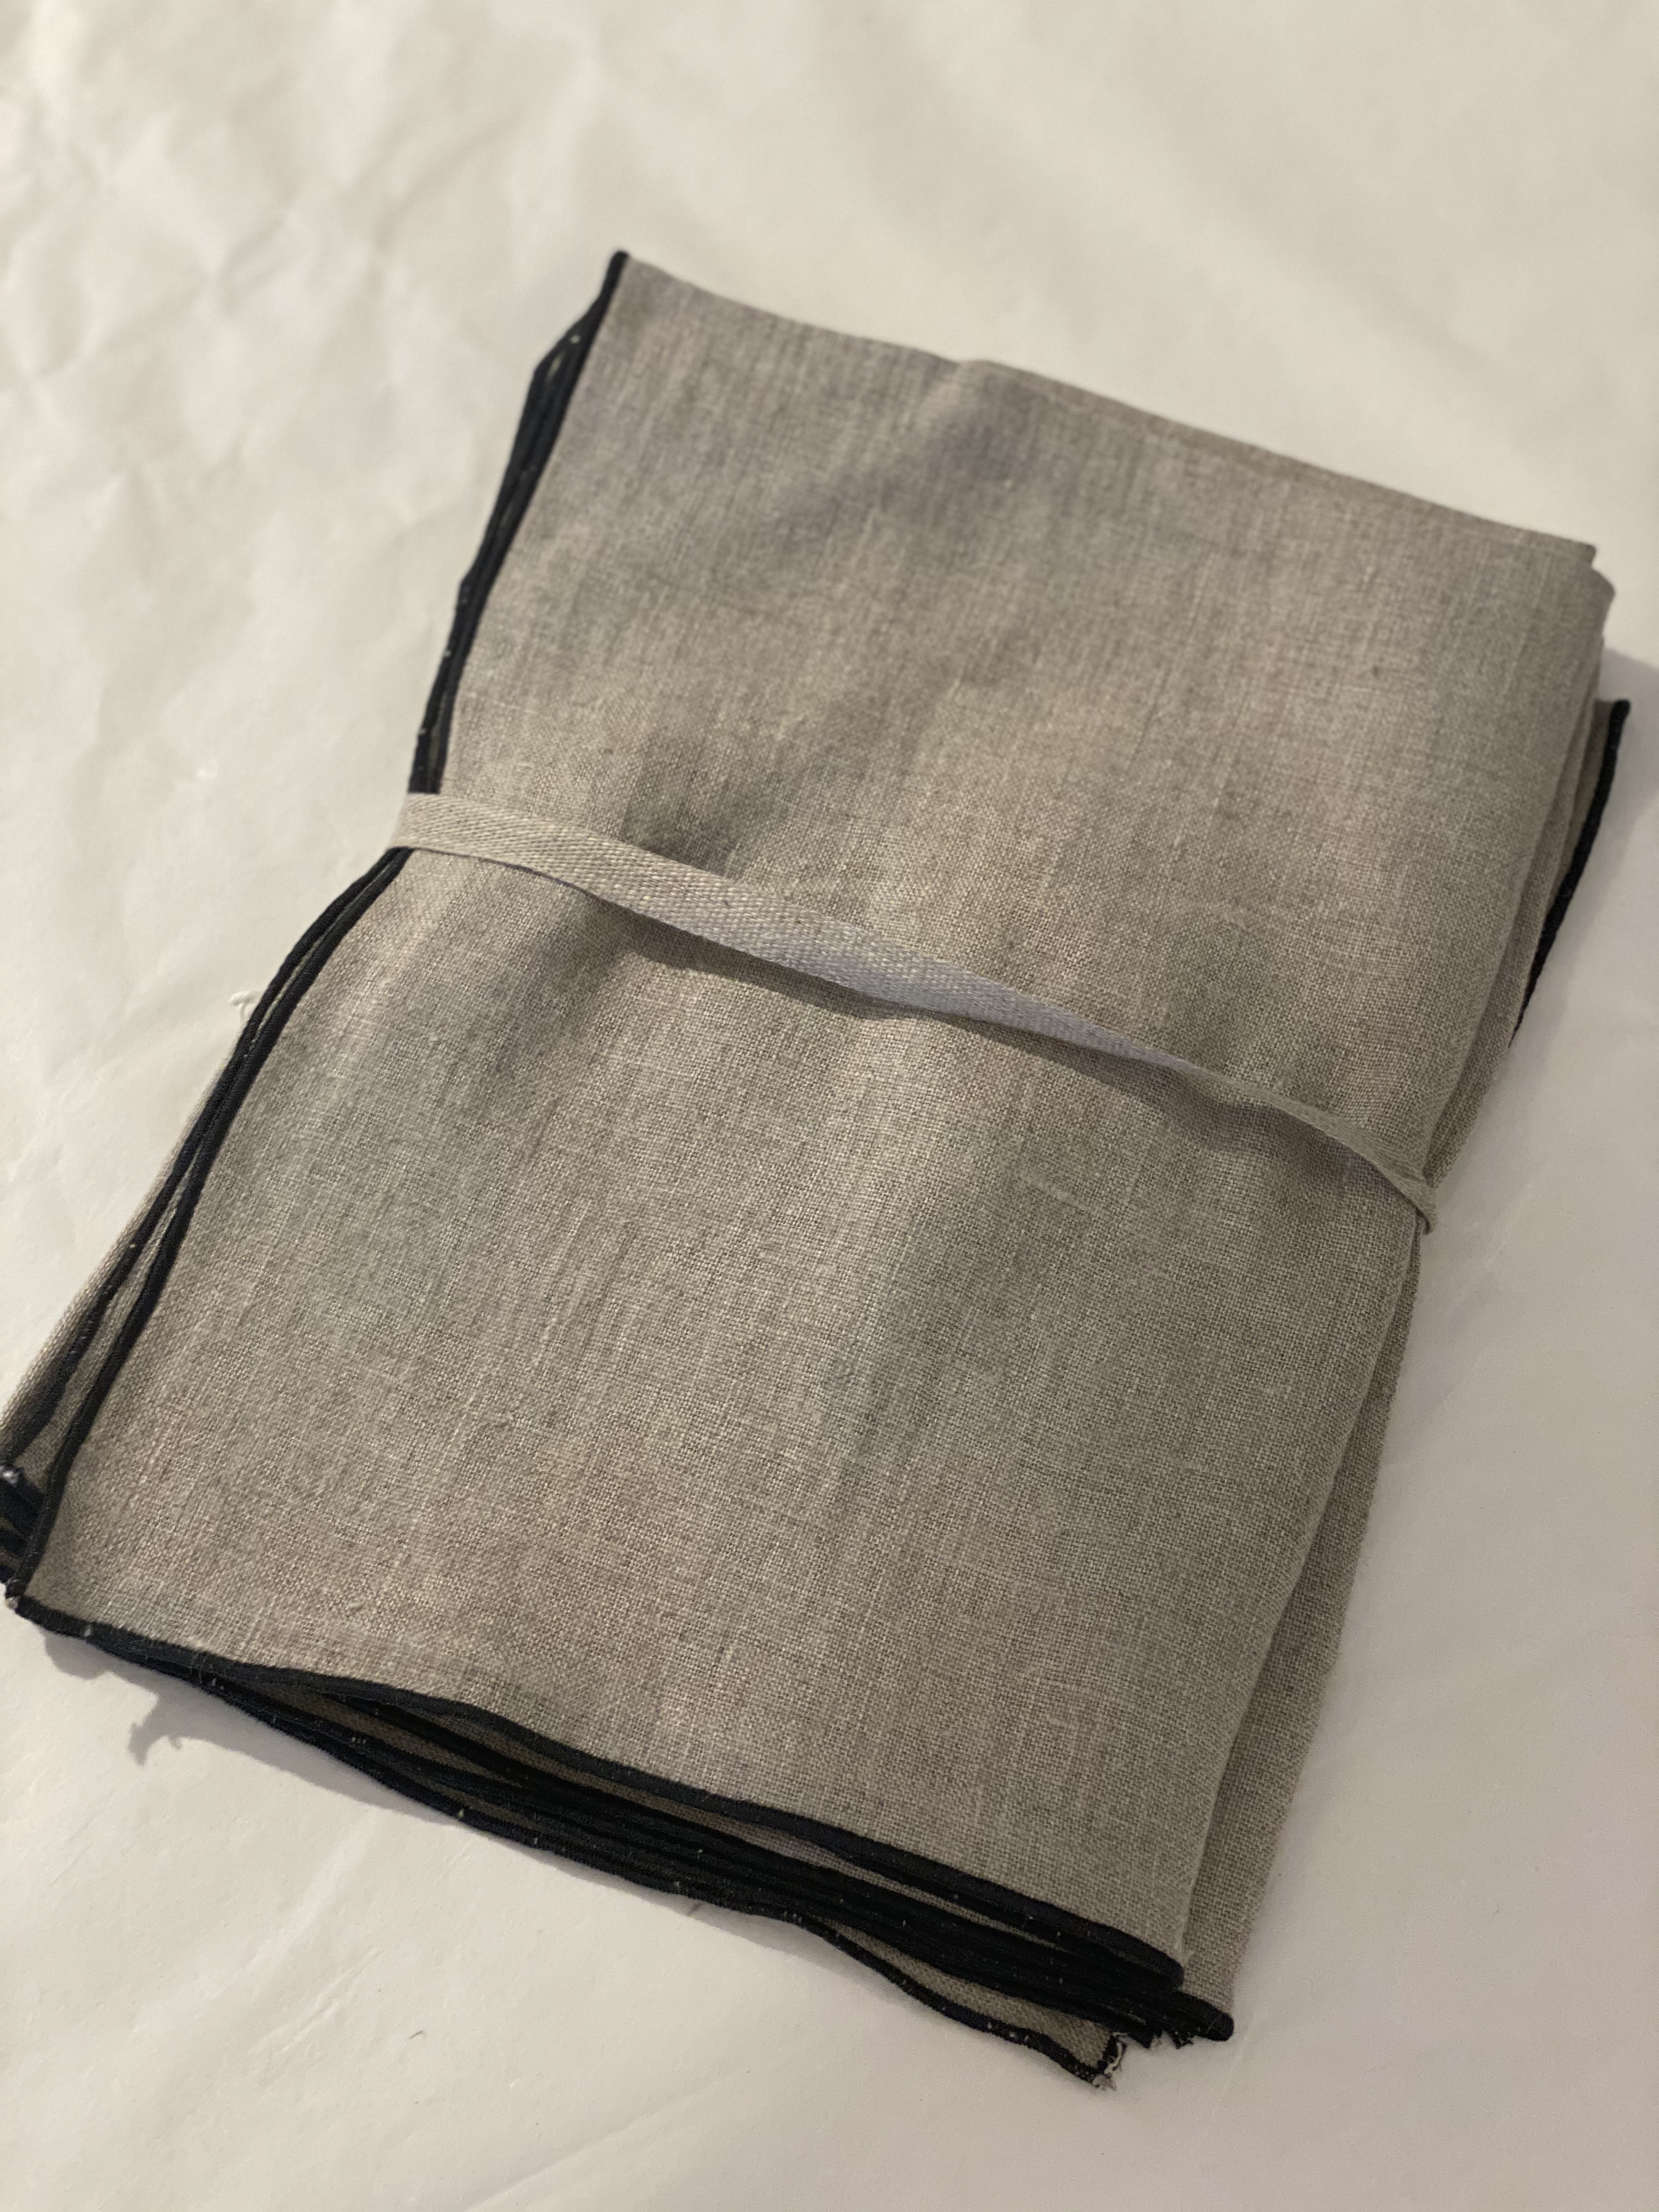 THE BROWNHOUSE INTERIORS XL Natural Linen Napkins with Black Oversewn Edge Detail